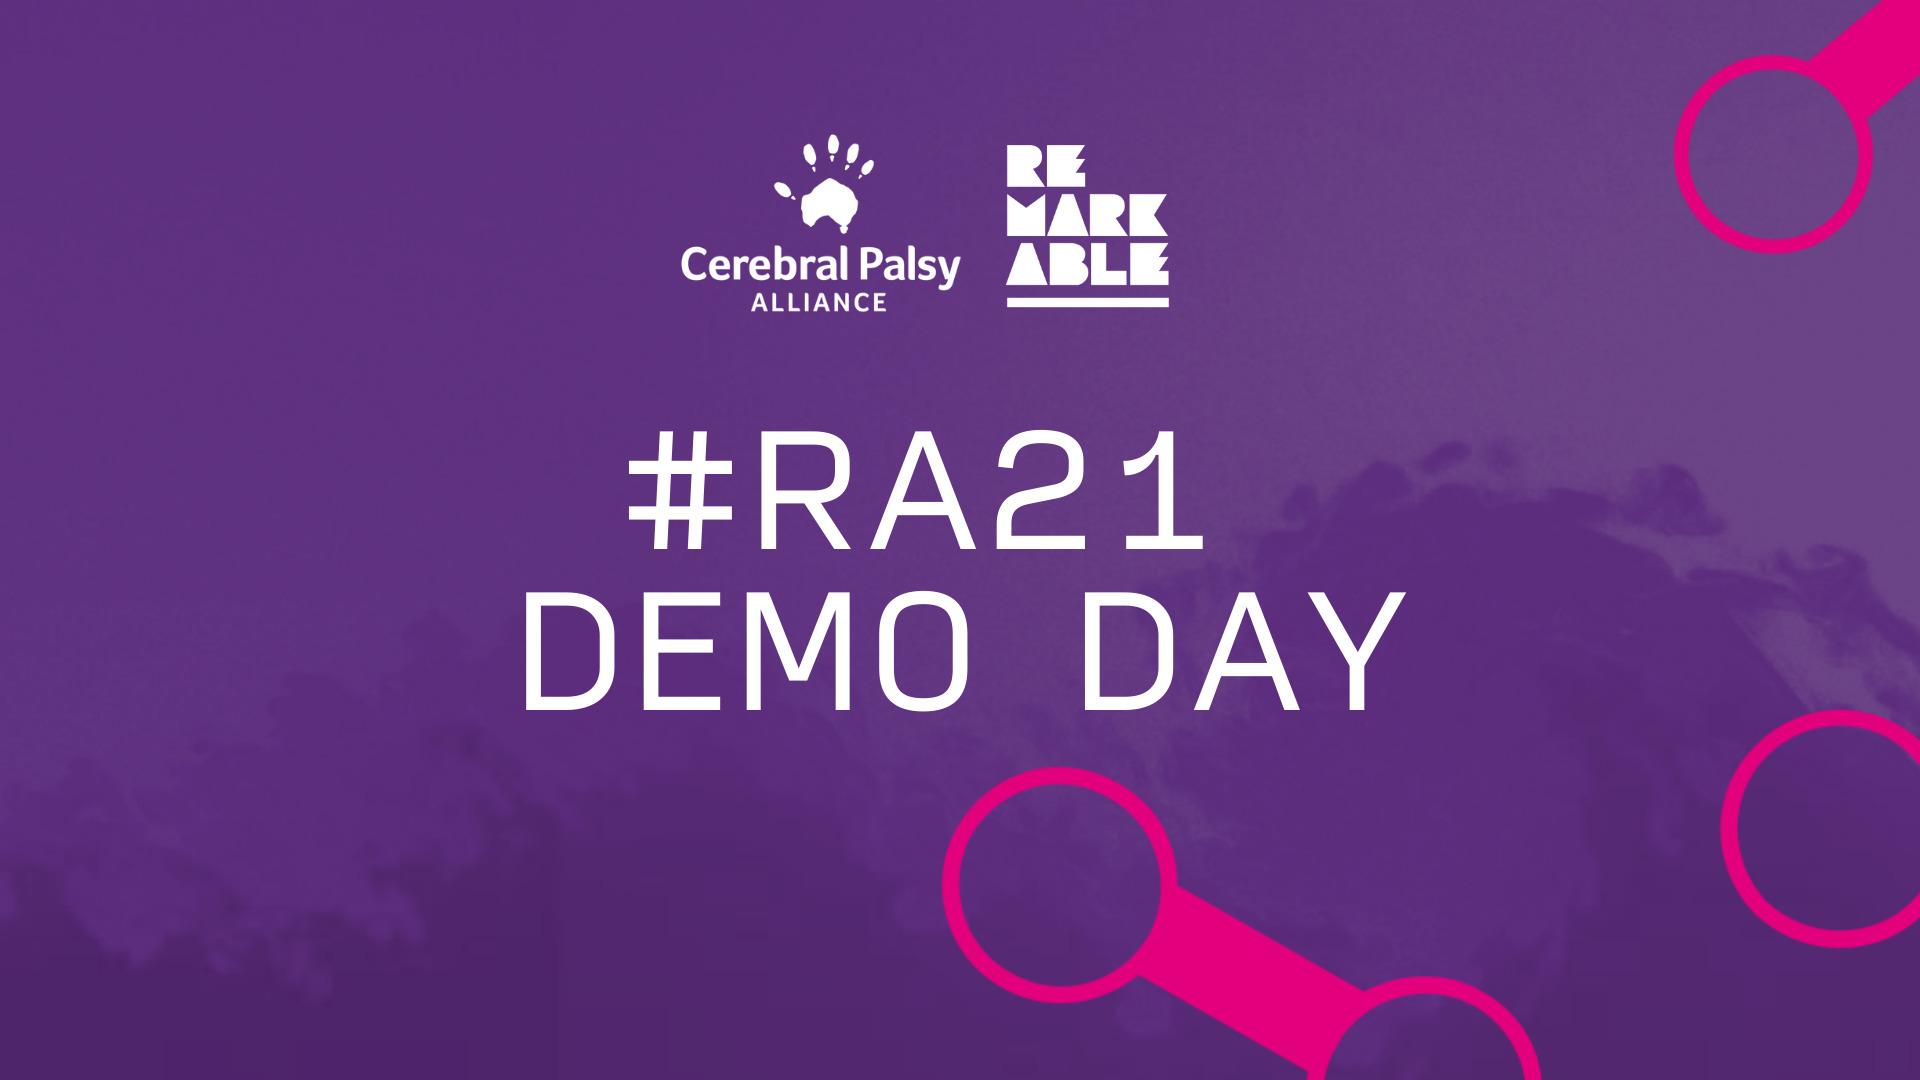 Join us for #RA21 Demo Day